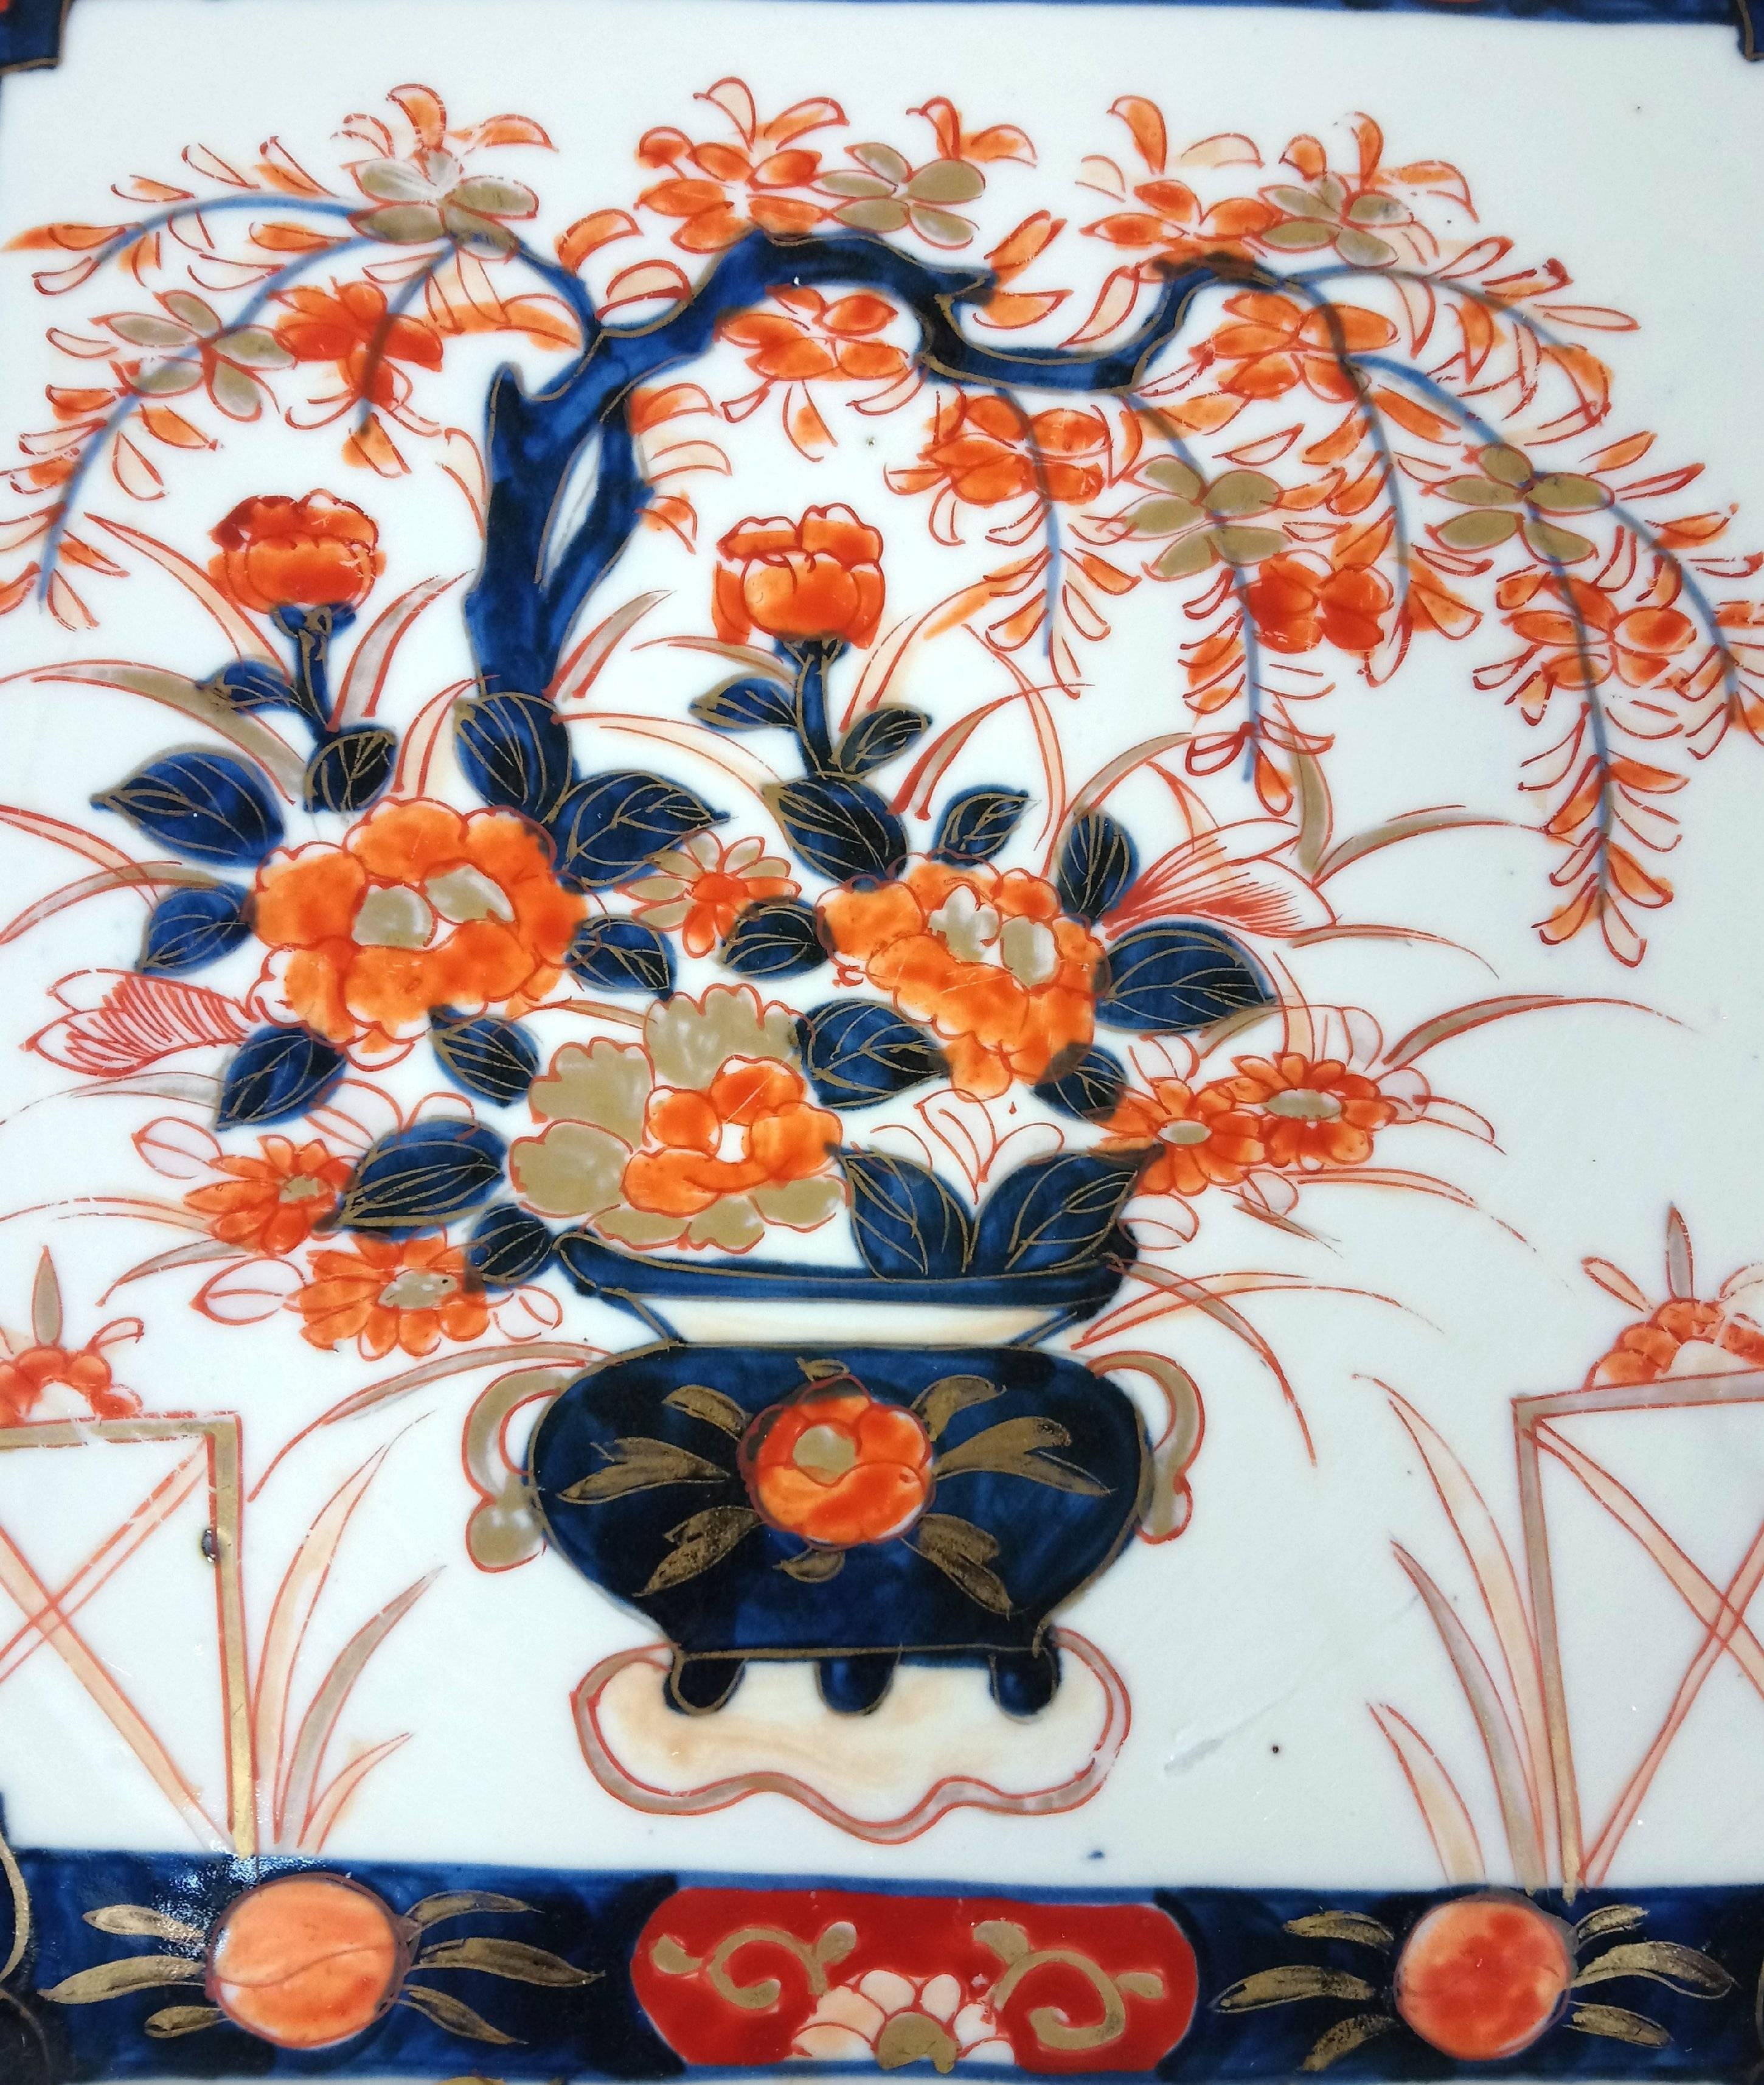 This very attractive and well-proportioned size 19th century. Japanese Meiji period Square platter features a central portrait of a blooming Jardinière of flowers with a trellis border of blooms and birds in the traditional deep blue and orange